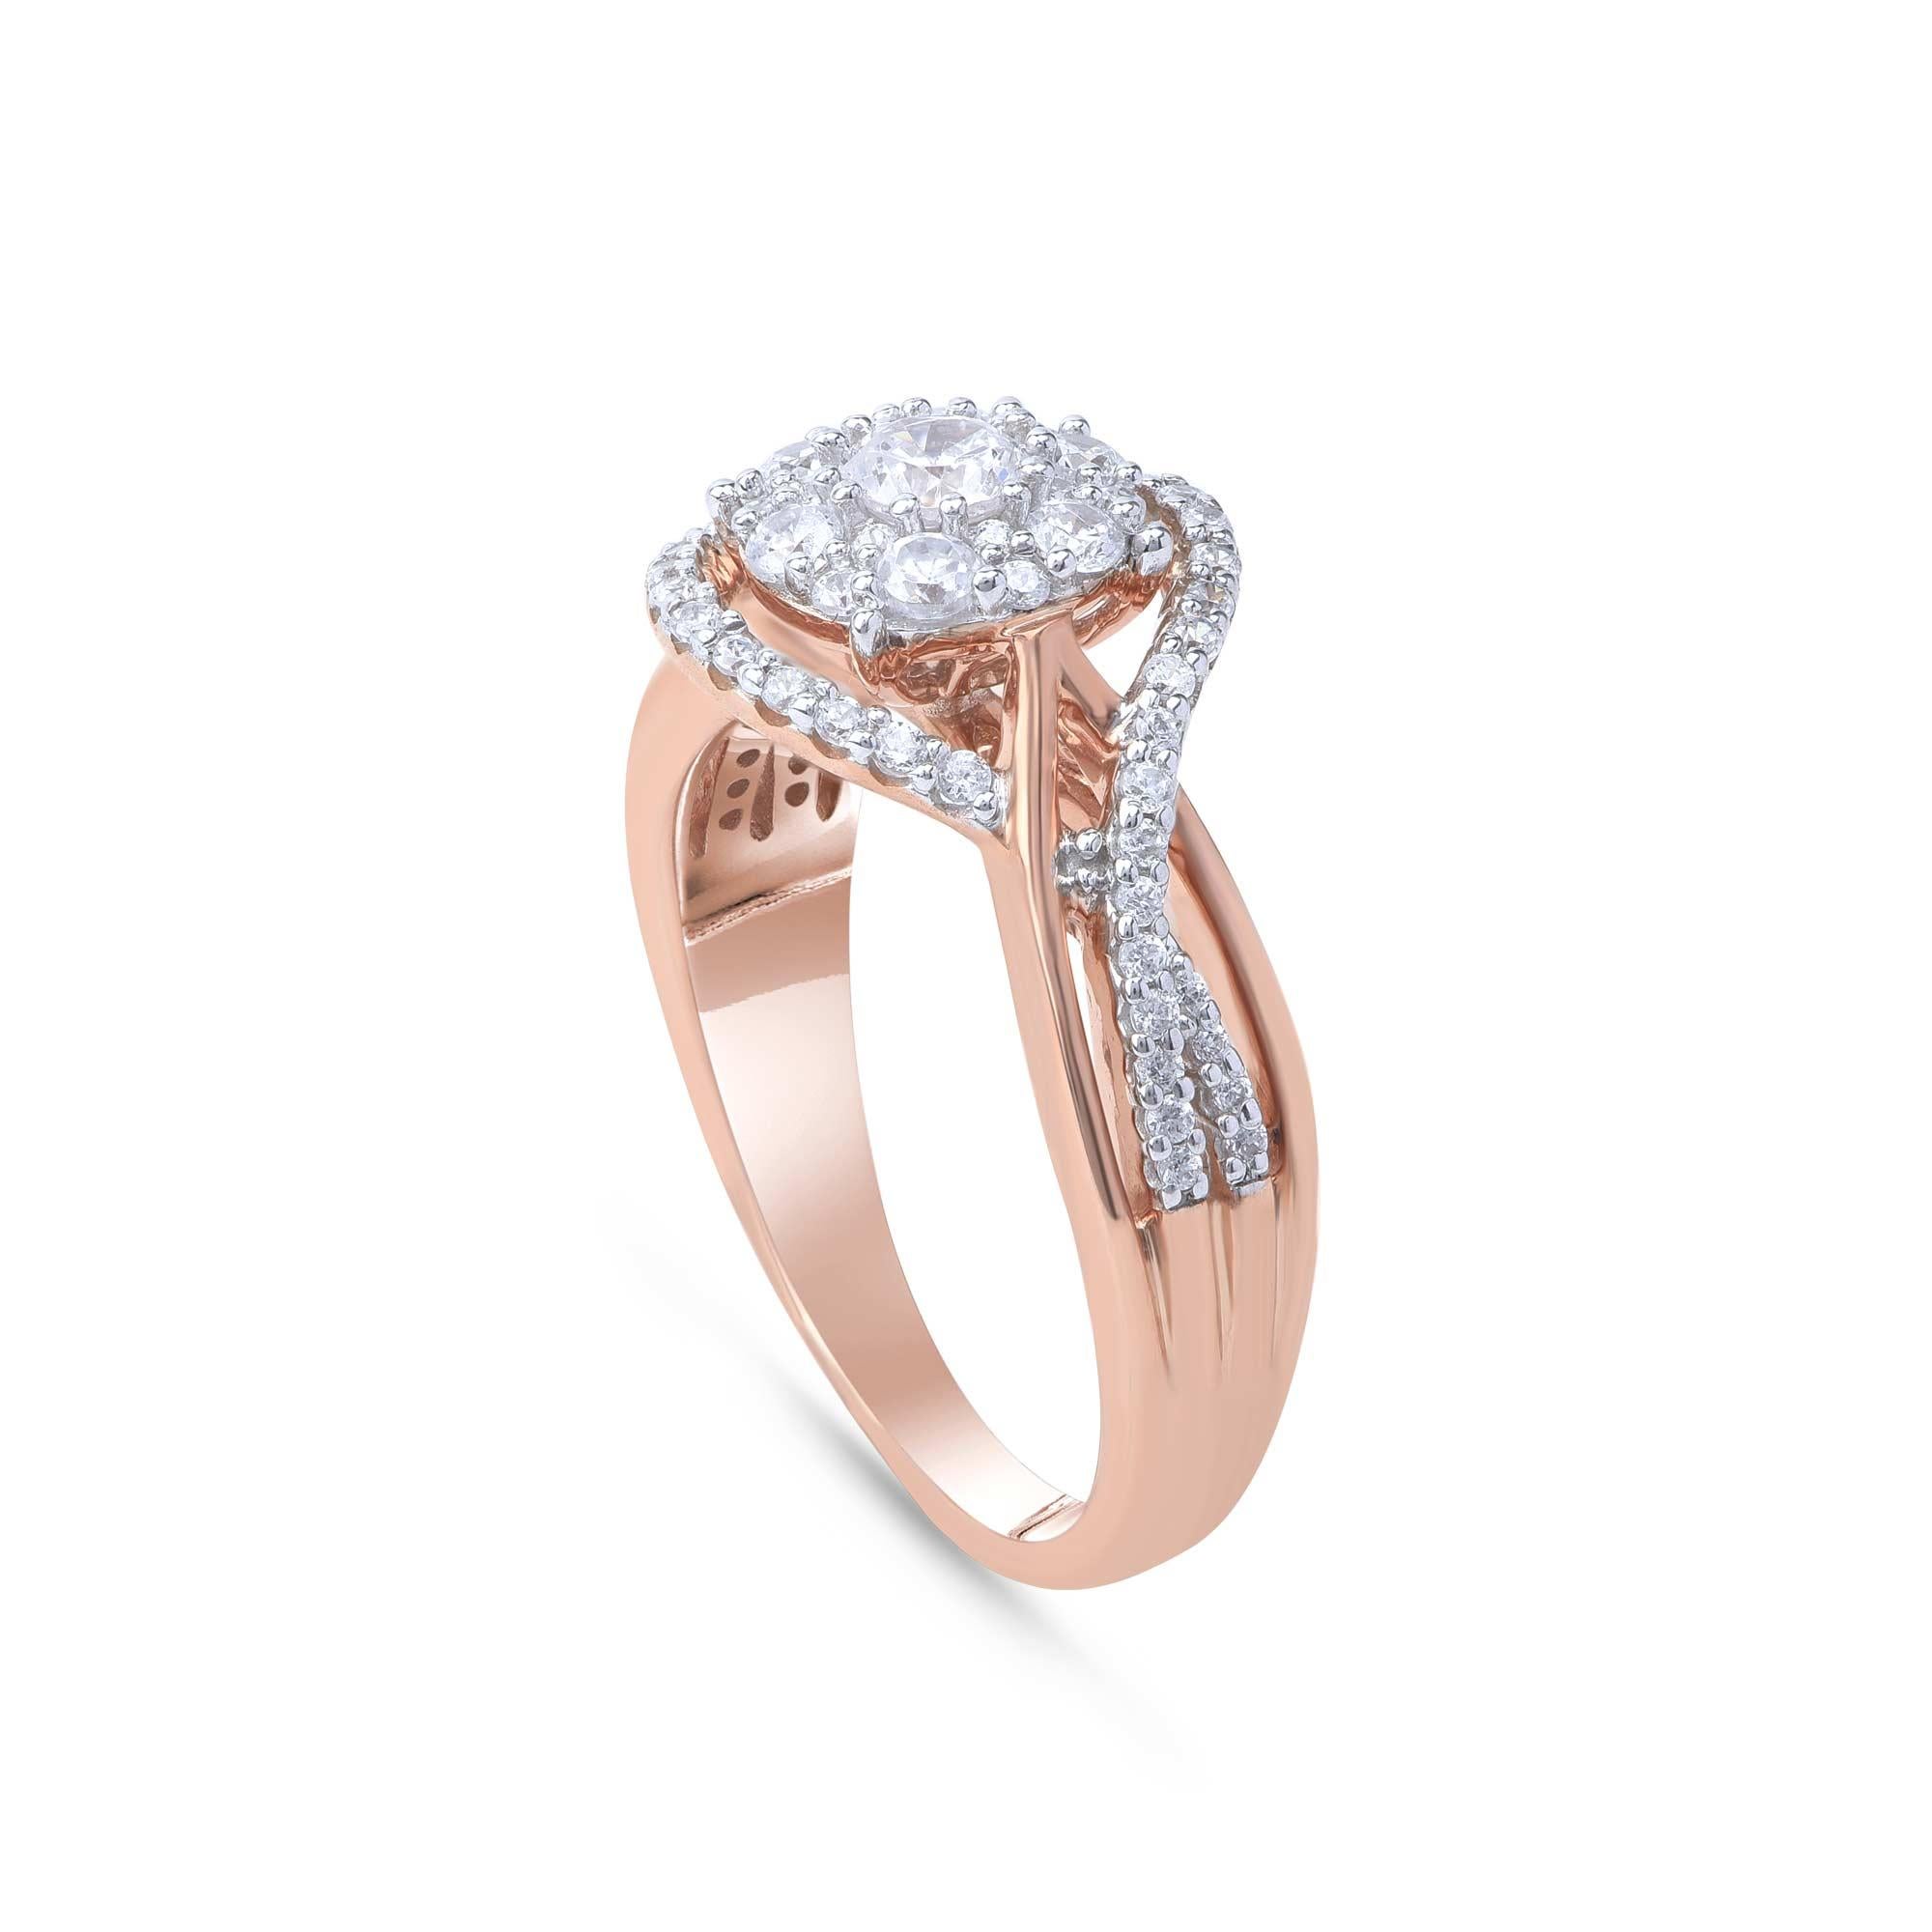 This gorgeous engagement ring is studded with 67 brilliant-cut diamonds set in prong setting and crafted in 18 KT rose gold. Diamonds are graded H Color, I1 Clarity.  

Metal color and ring size can be customized on request. 

This piece is made to